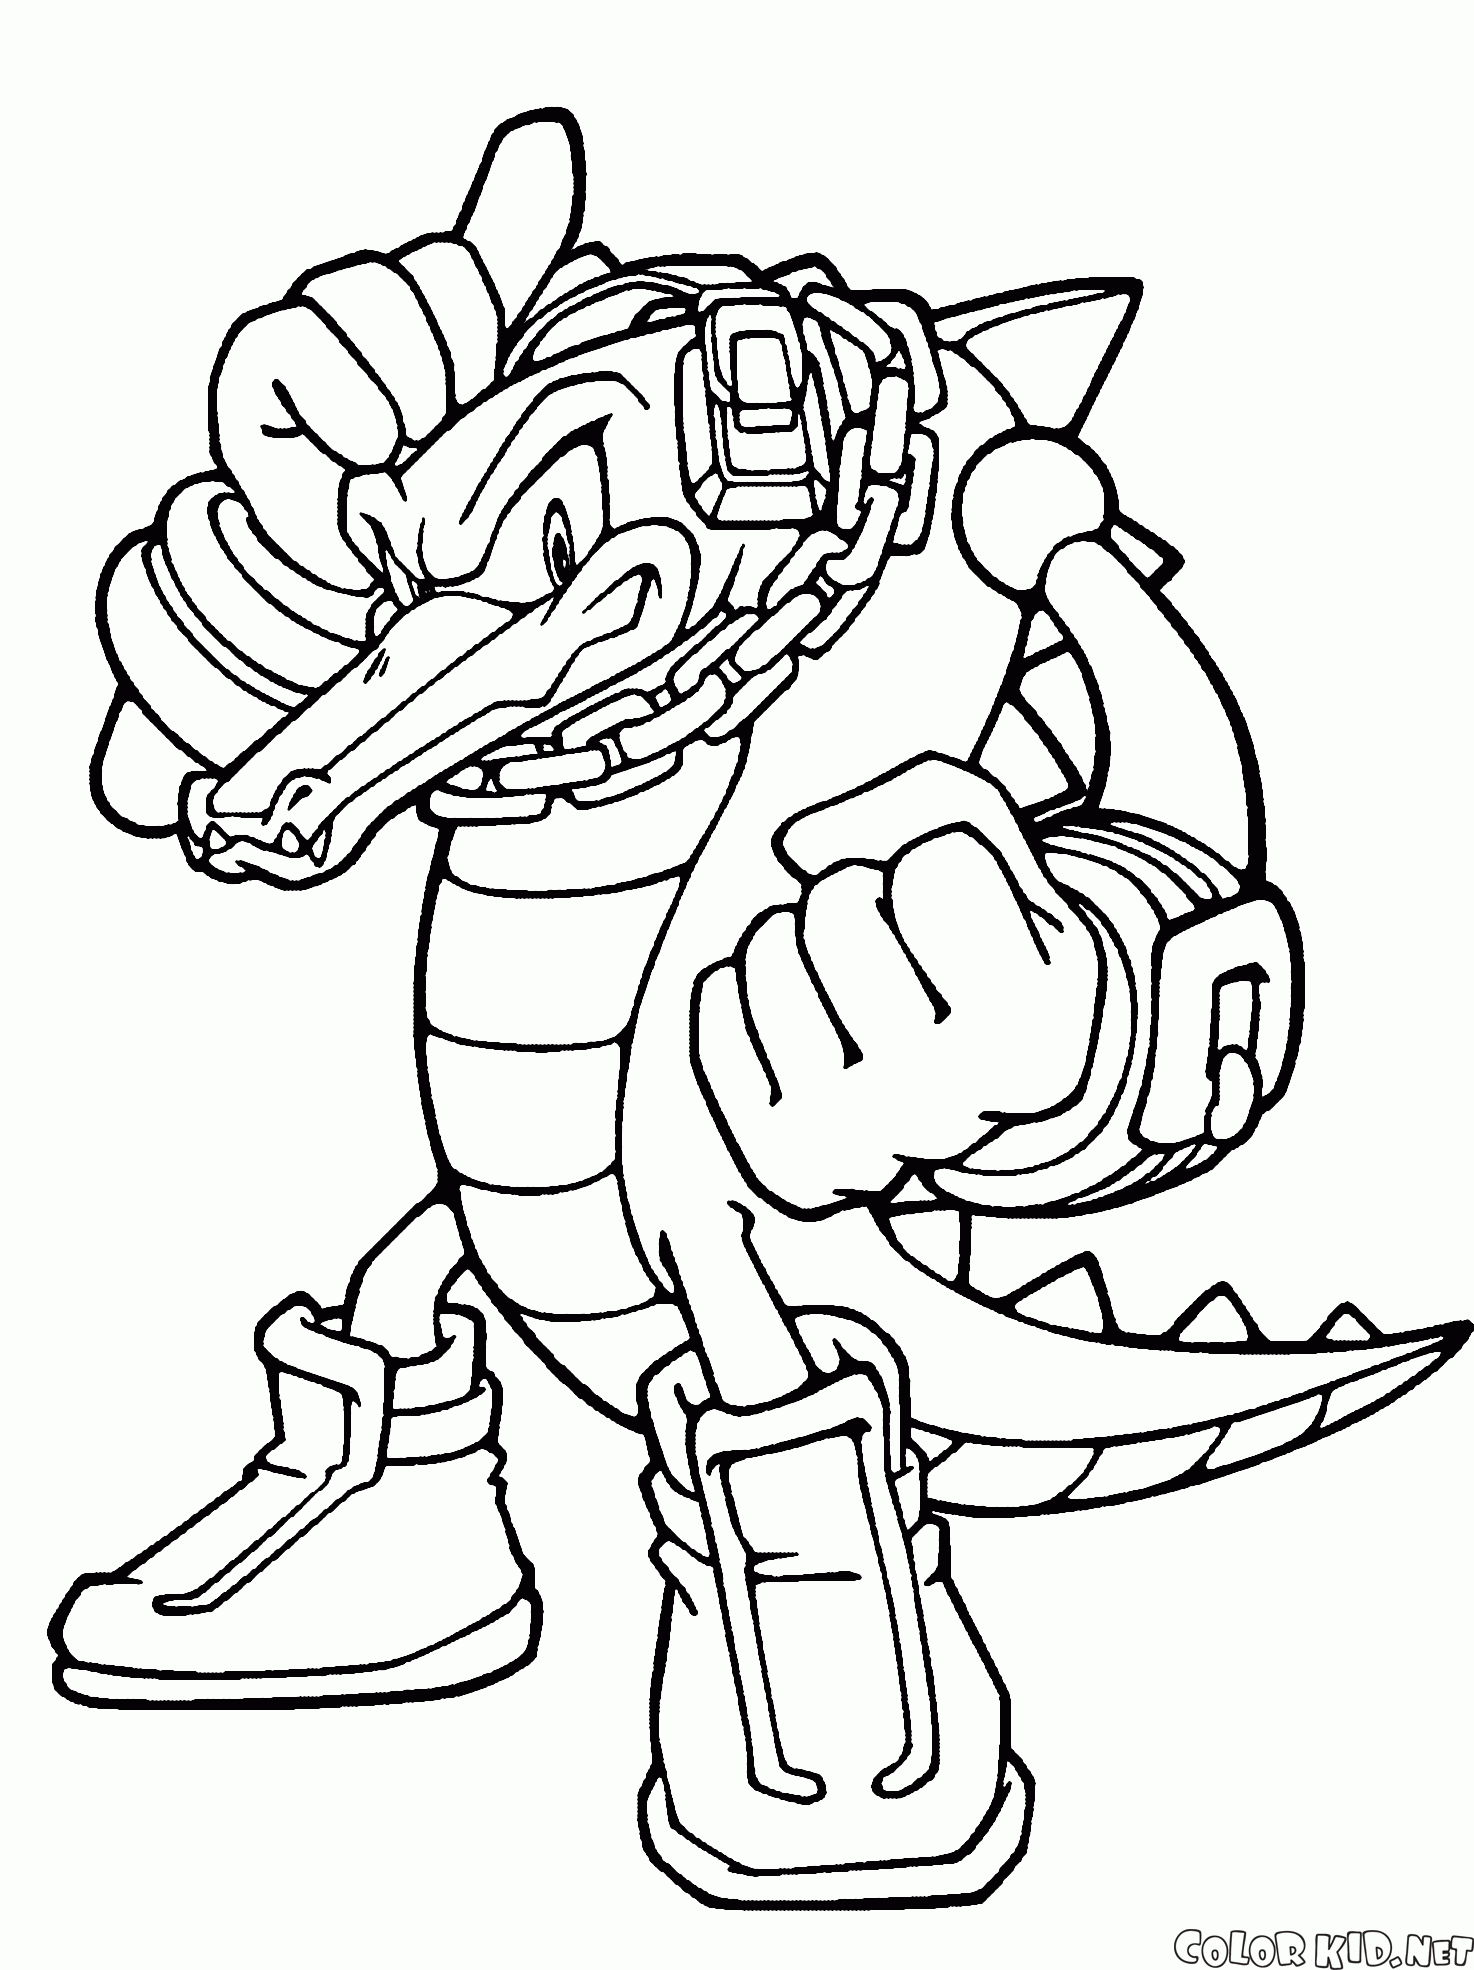 dr eggman coloring pages coloring page dr eggman eggman coloring pages dr 